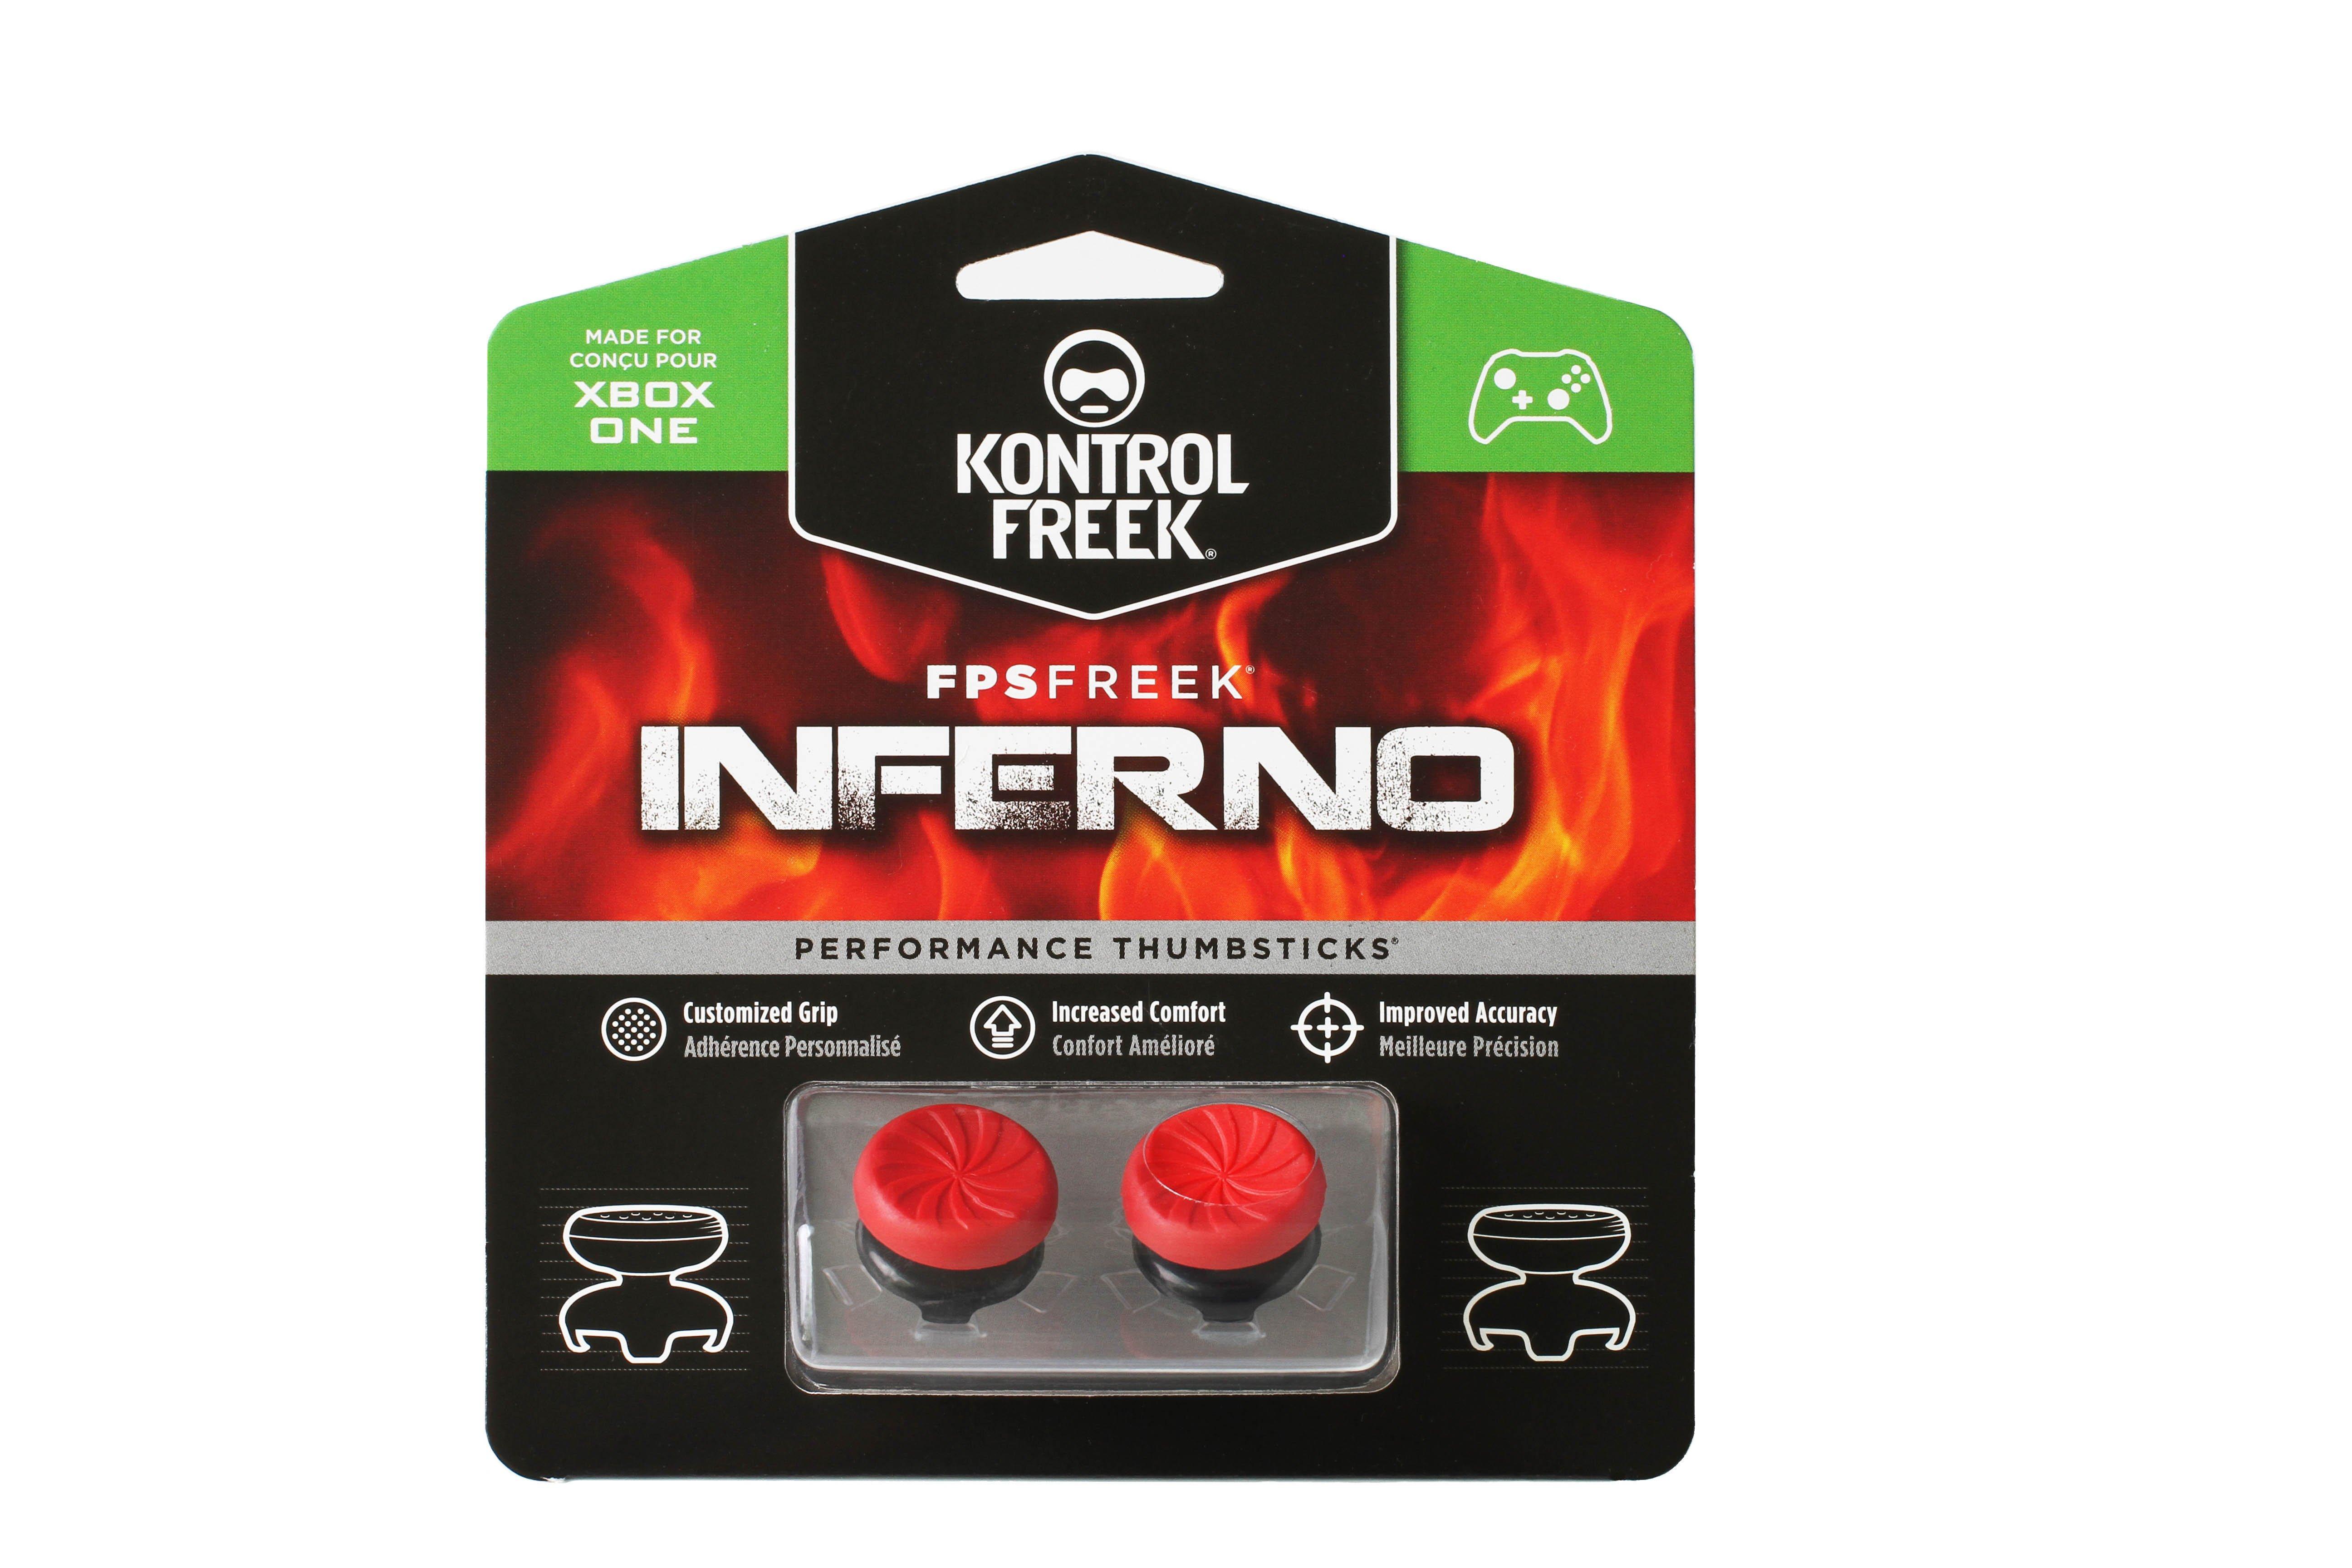 Thumbsticks for Performance KontrolFreek GameStop X Freek Series FPS Xbox | and One Xbox Inferno